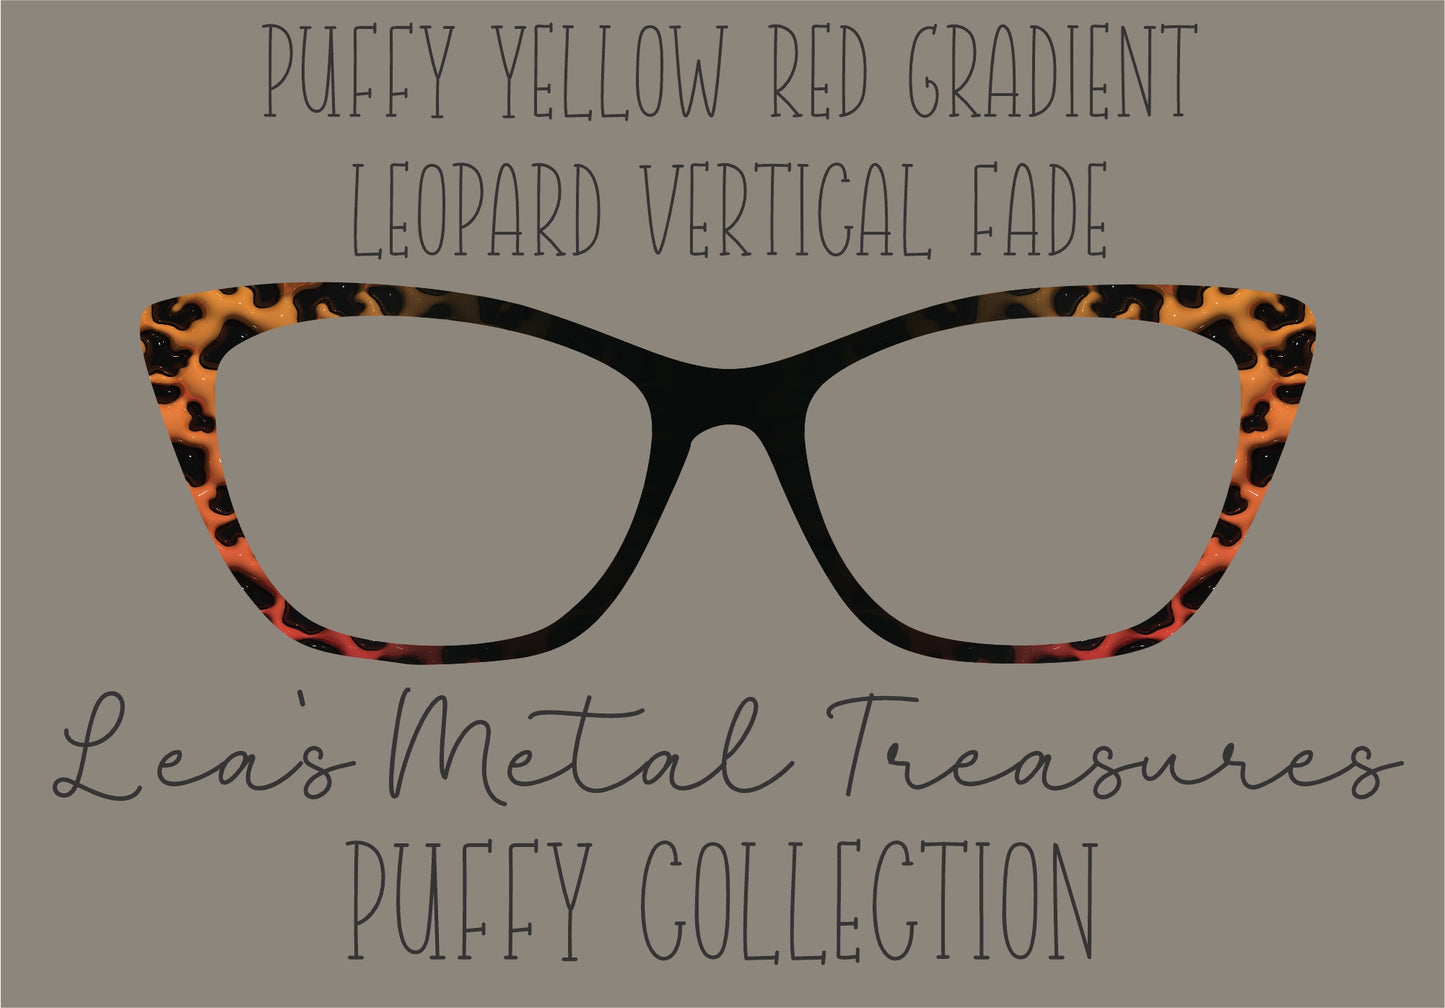 PUFFY YELLOW RED GRADIENT LEOPARD VERTICAL FADE Eyewear Frame Toppers COMES WITH MAGNETS